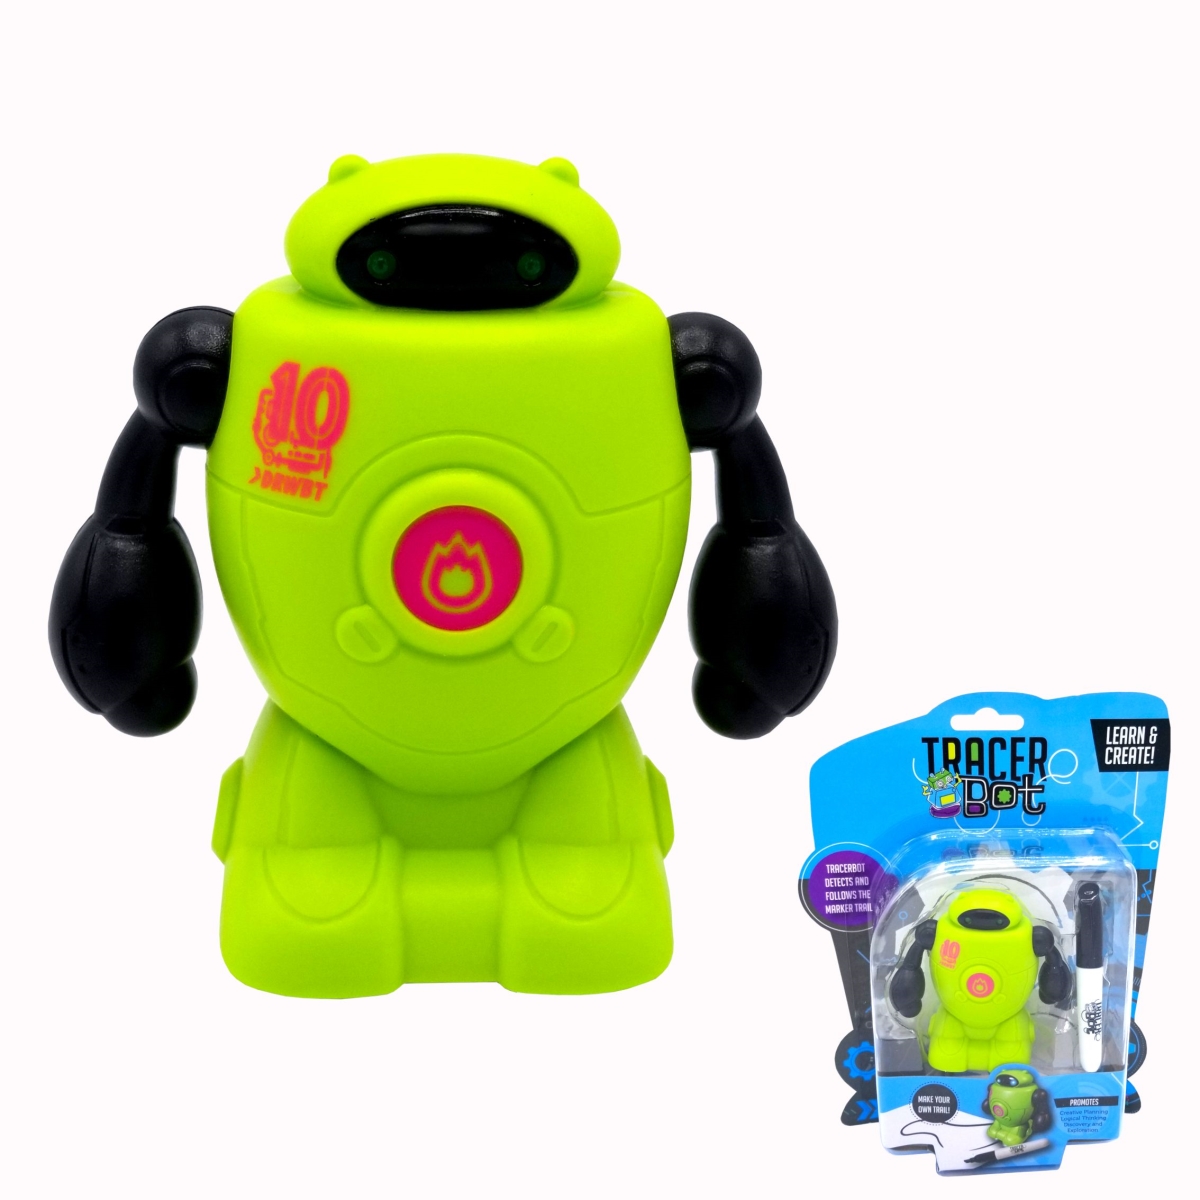 Picture of Mukikim MUK-DB21 Tracerbot Mini Inductive Robot Toy - Green